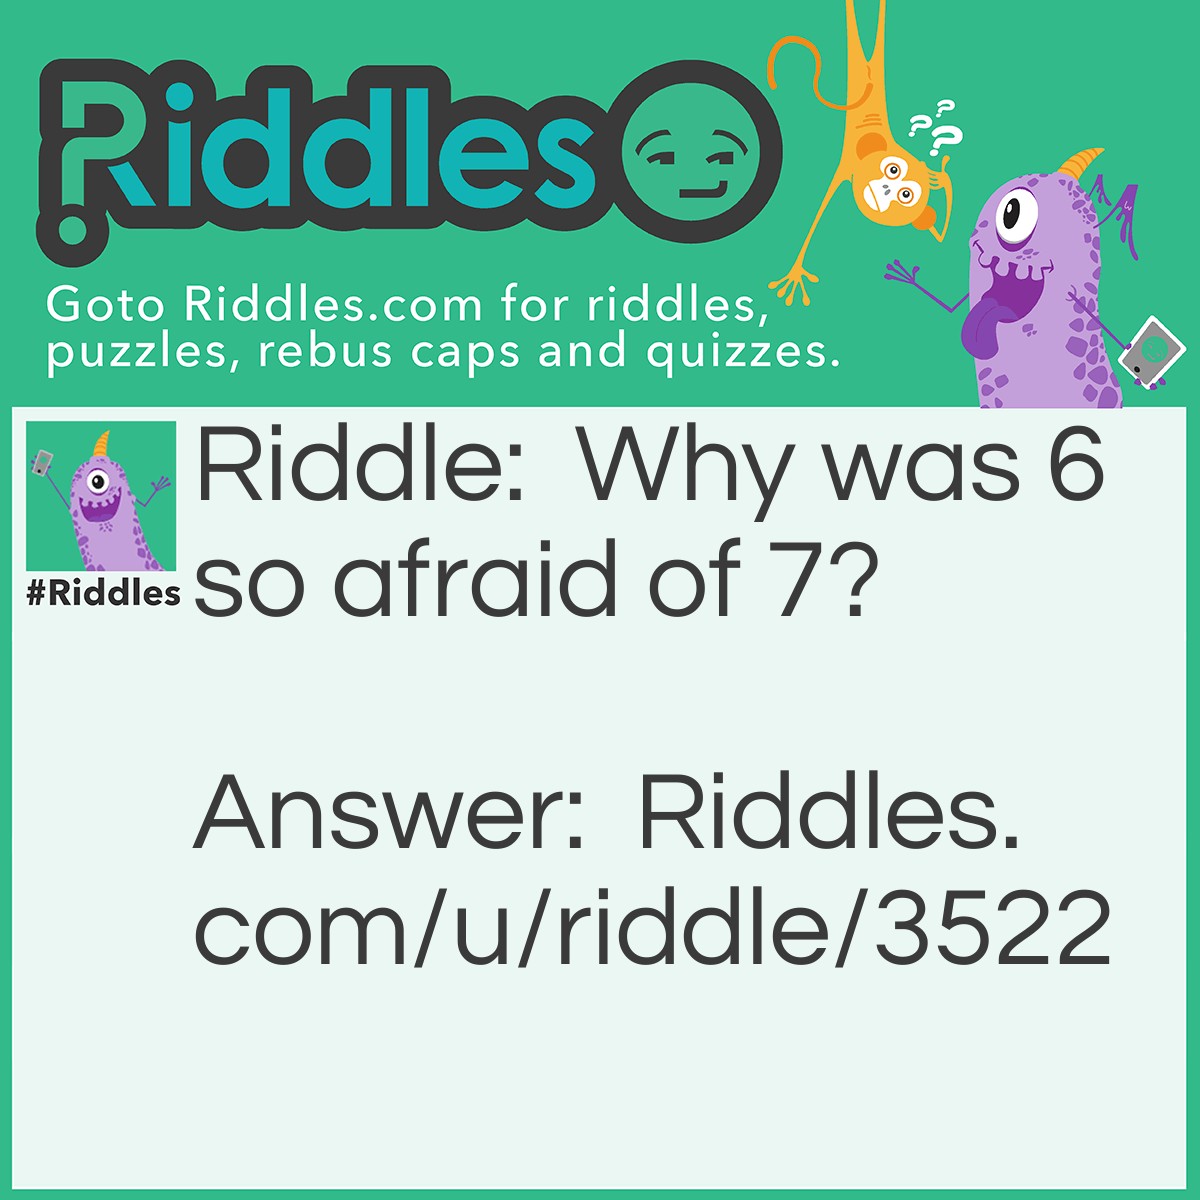 Riddle: Why was 6 so afraid of 7? Answer: Because 7 ate 9!